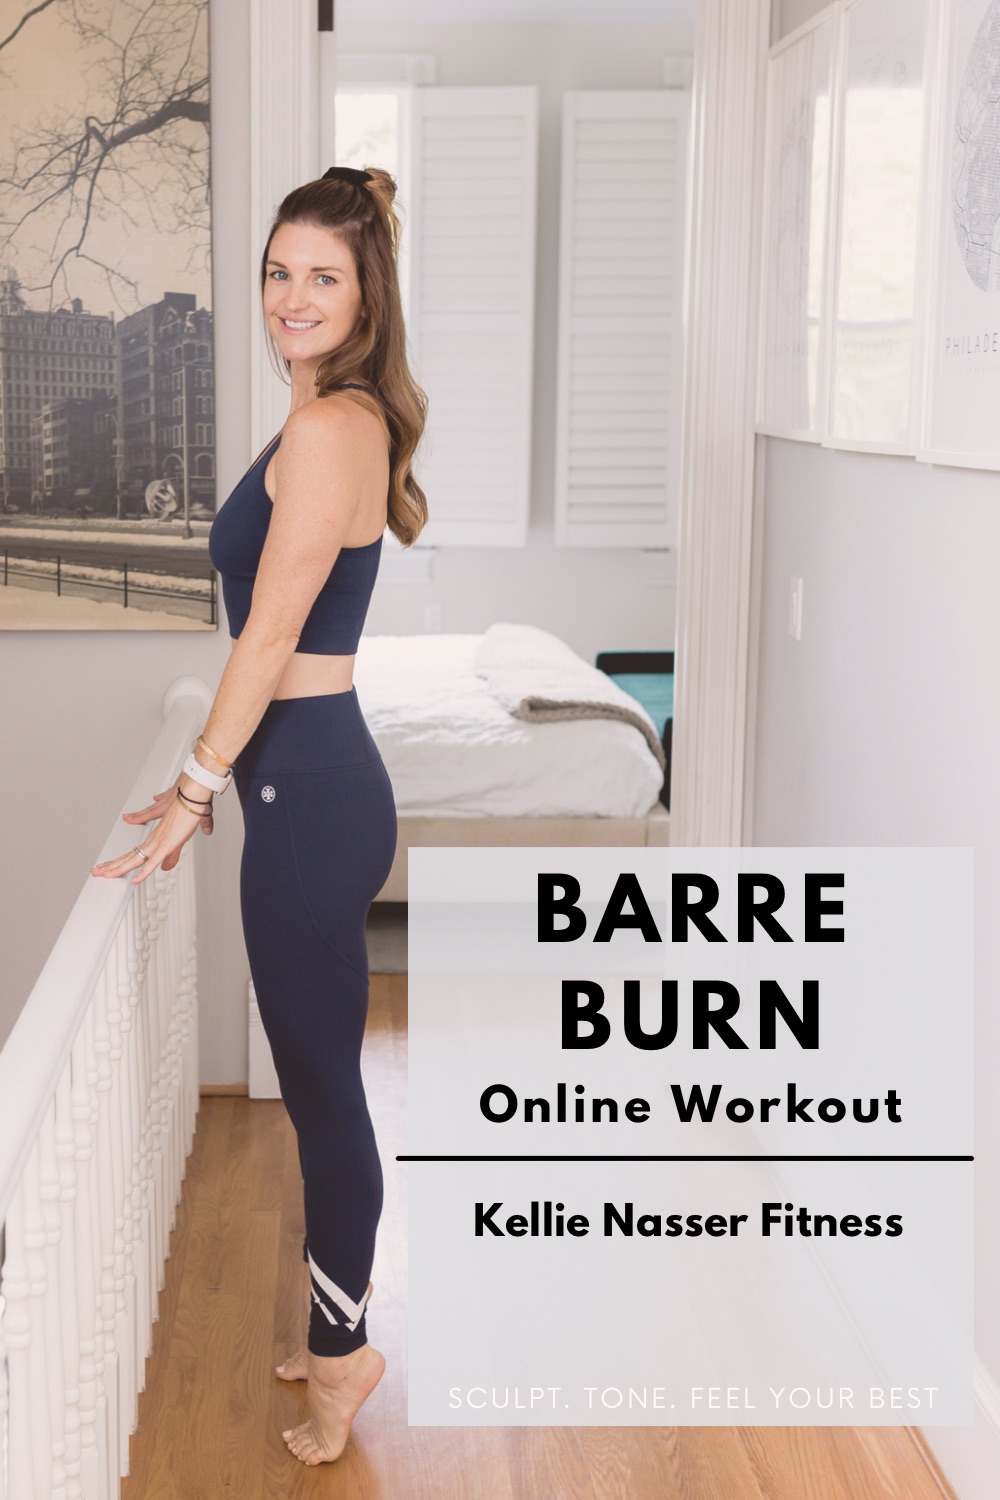 17 minute barre workout, barre burn workout, ariana grande barre workout, low impact exercises for women, sculptone workouts, sculpt and tone workouts for women